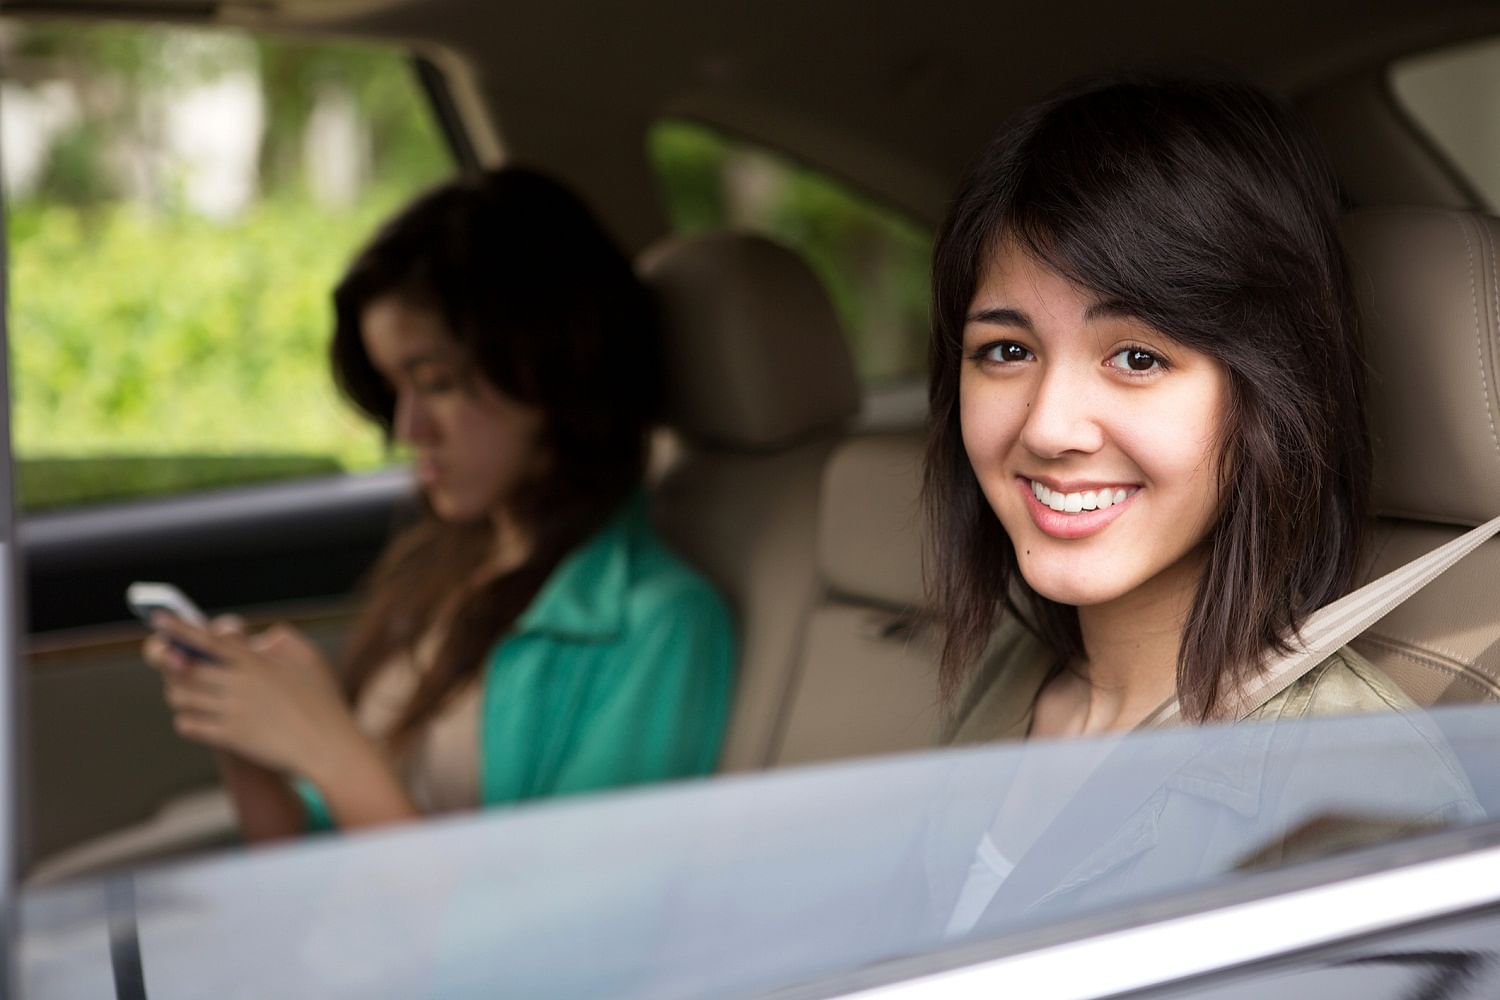 Women worry about security and are hesitant to choose shared rides.